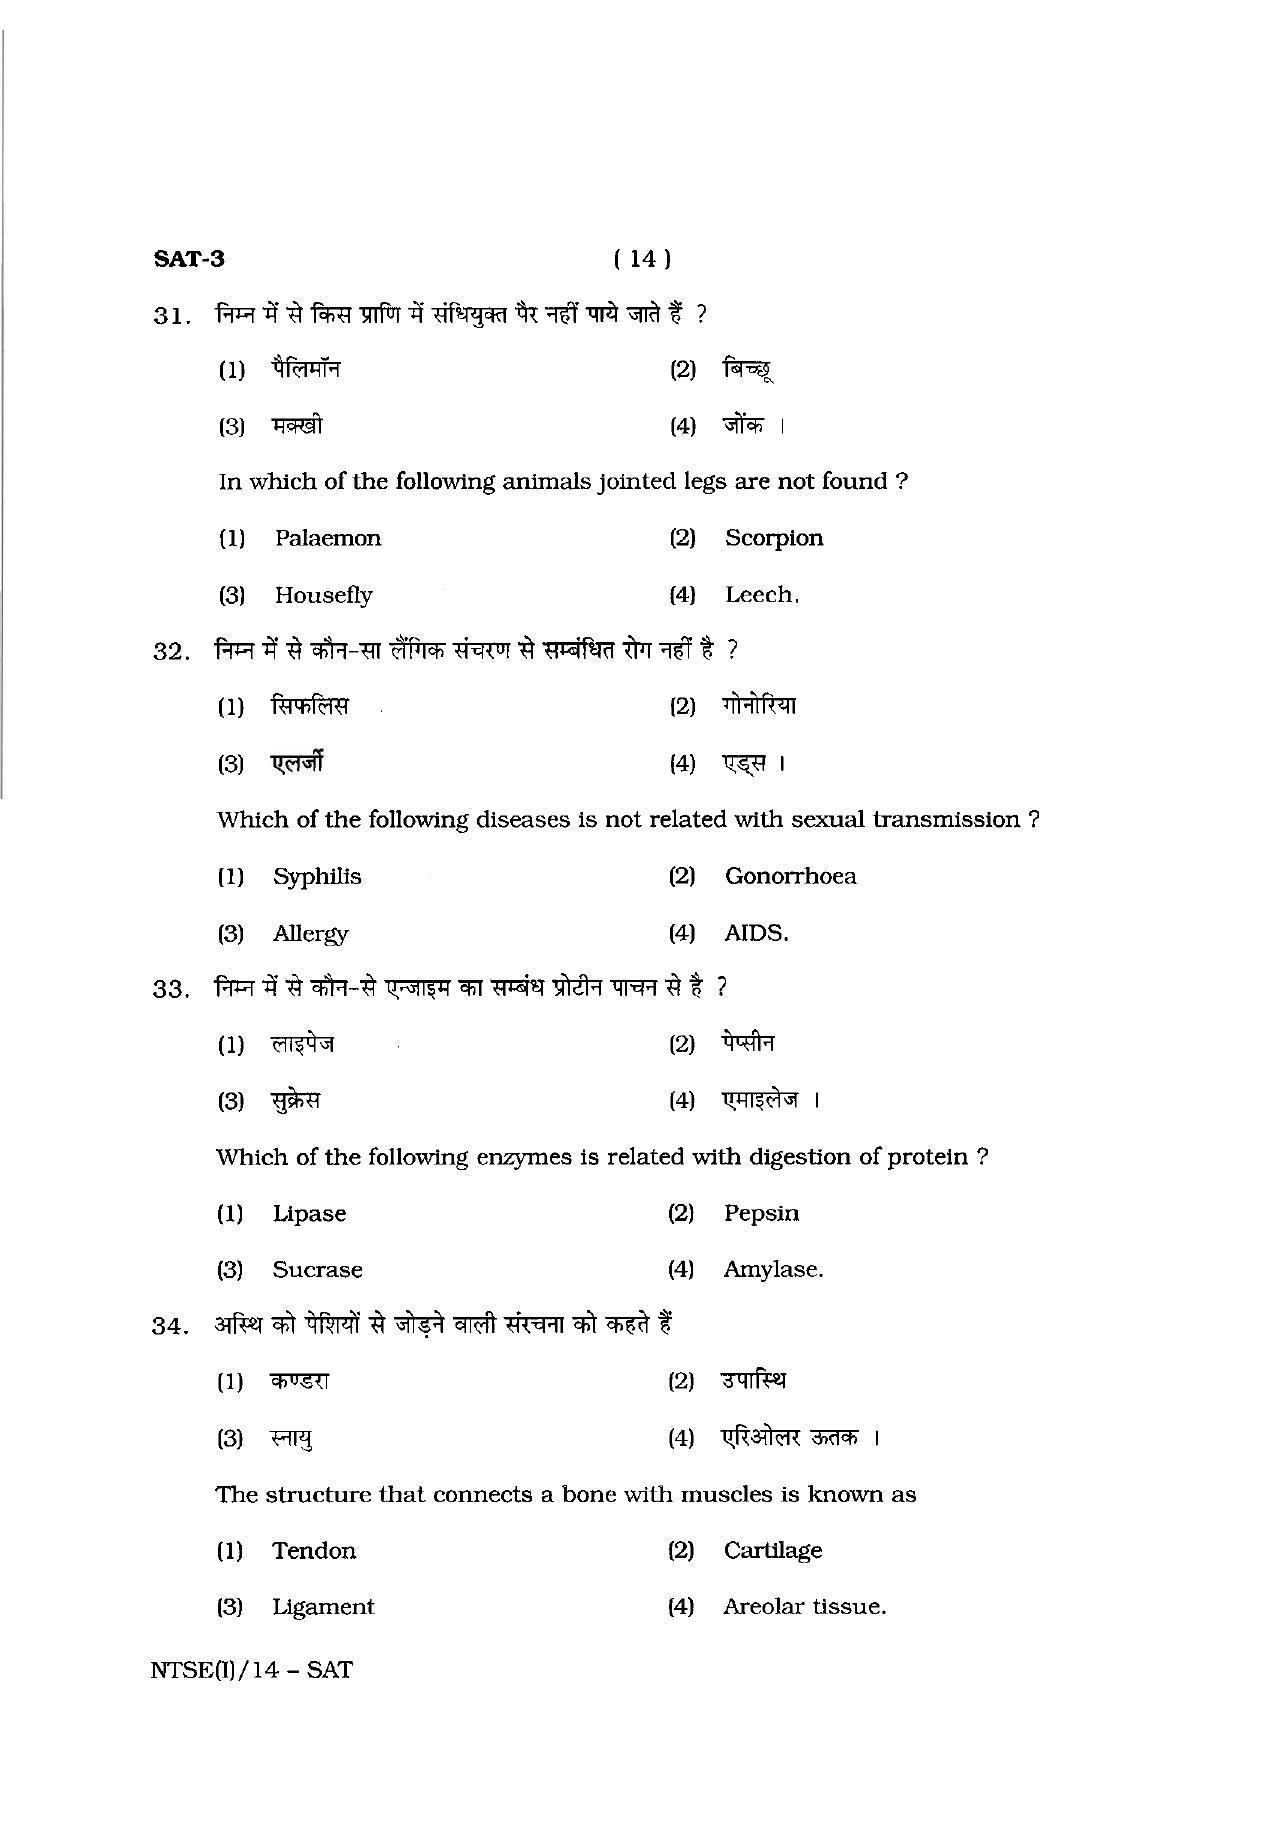 NTSE 2014 (Stage II) SAT Question Paper - Page 14